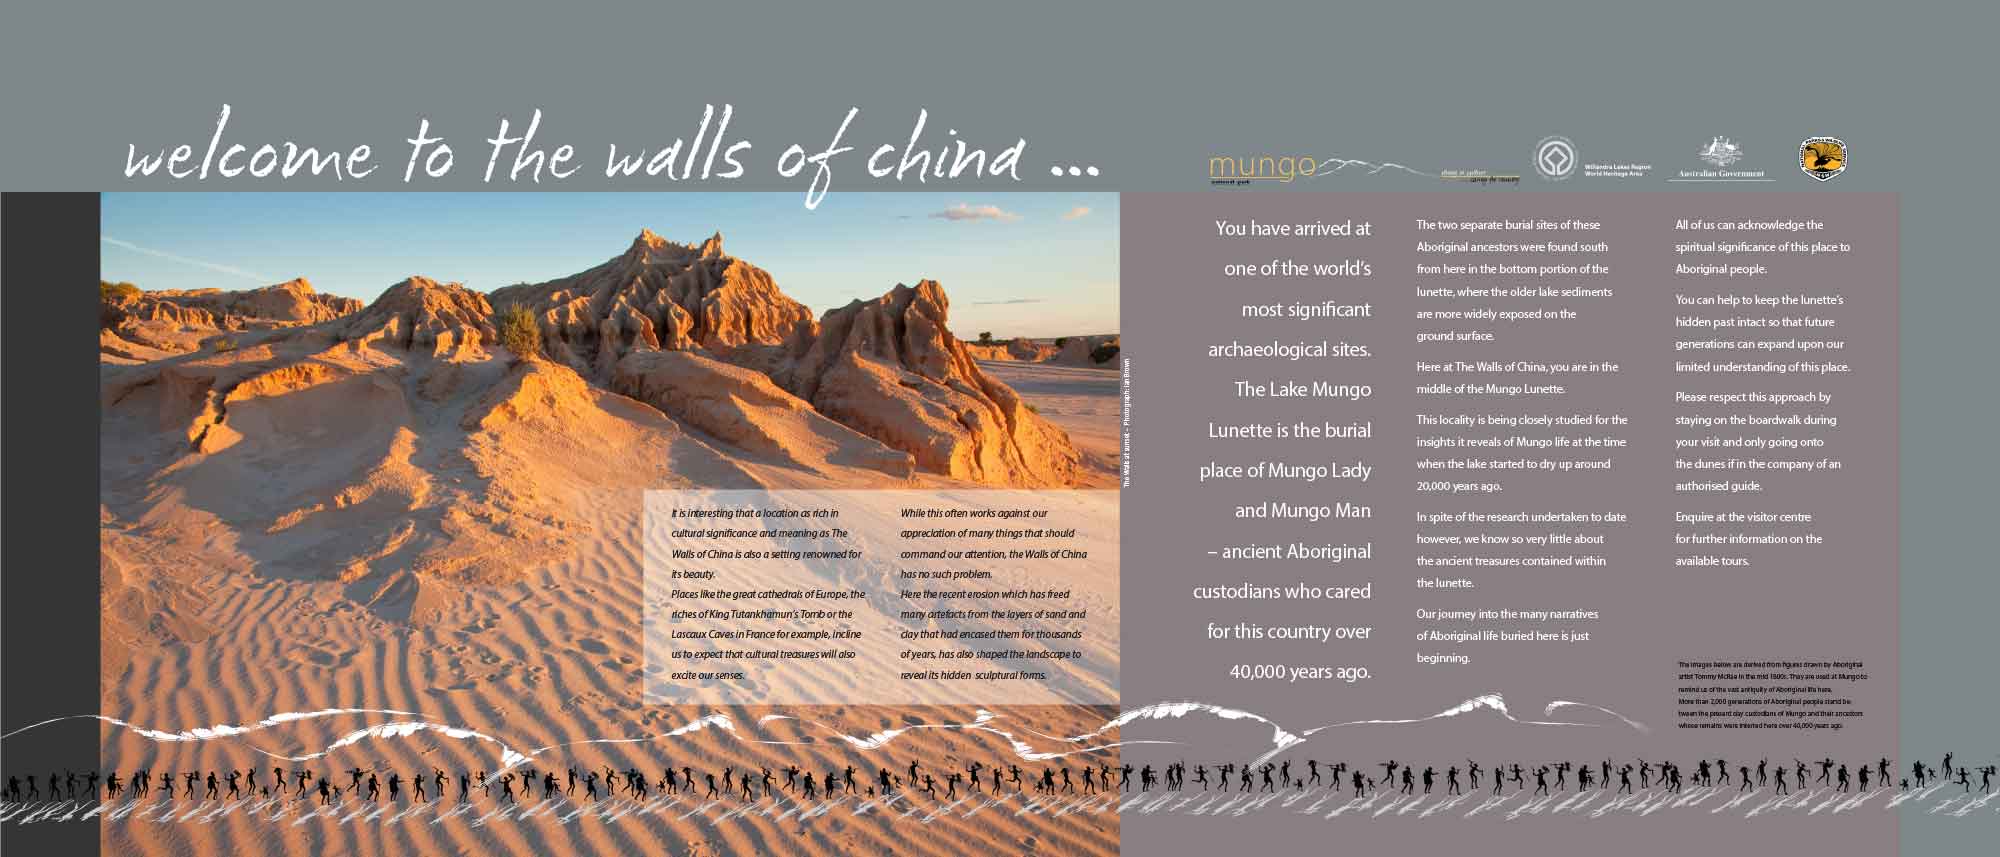 interpretive signs at the Walls of China in Mungo National Park integrate create design to reflect the beauty and cultural significance of this location